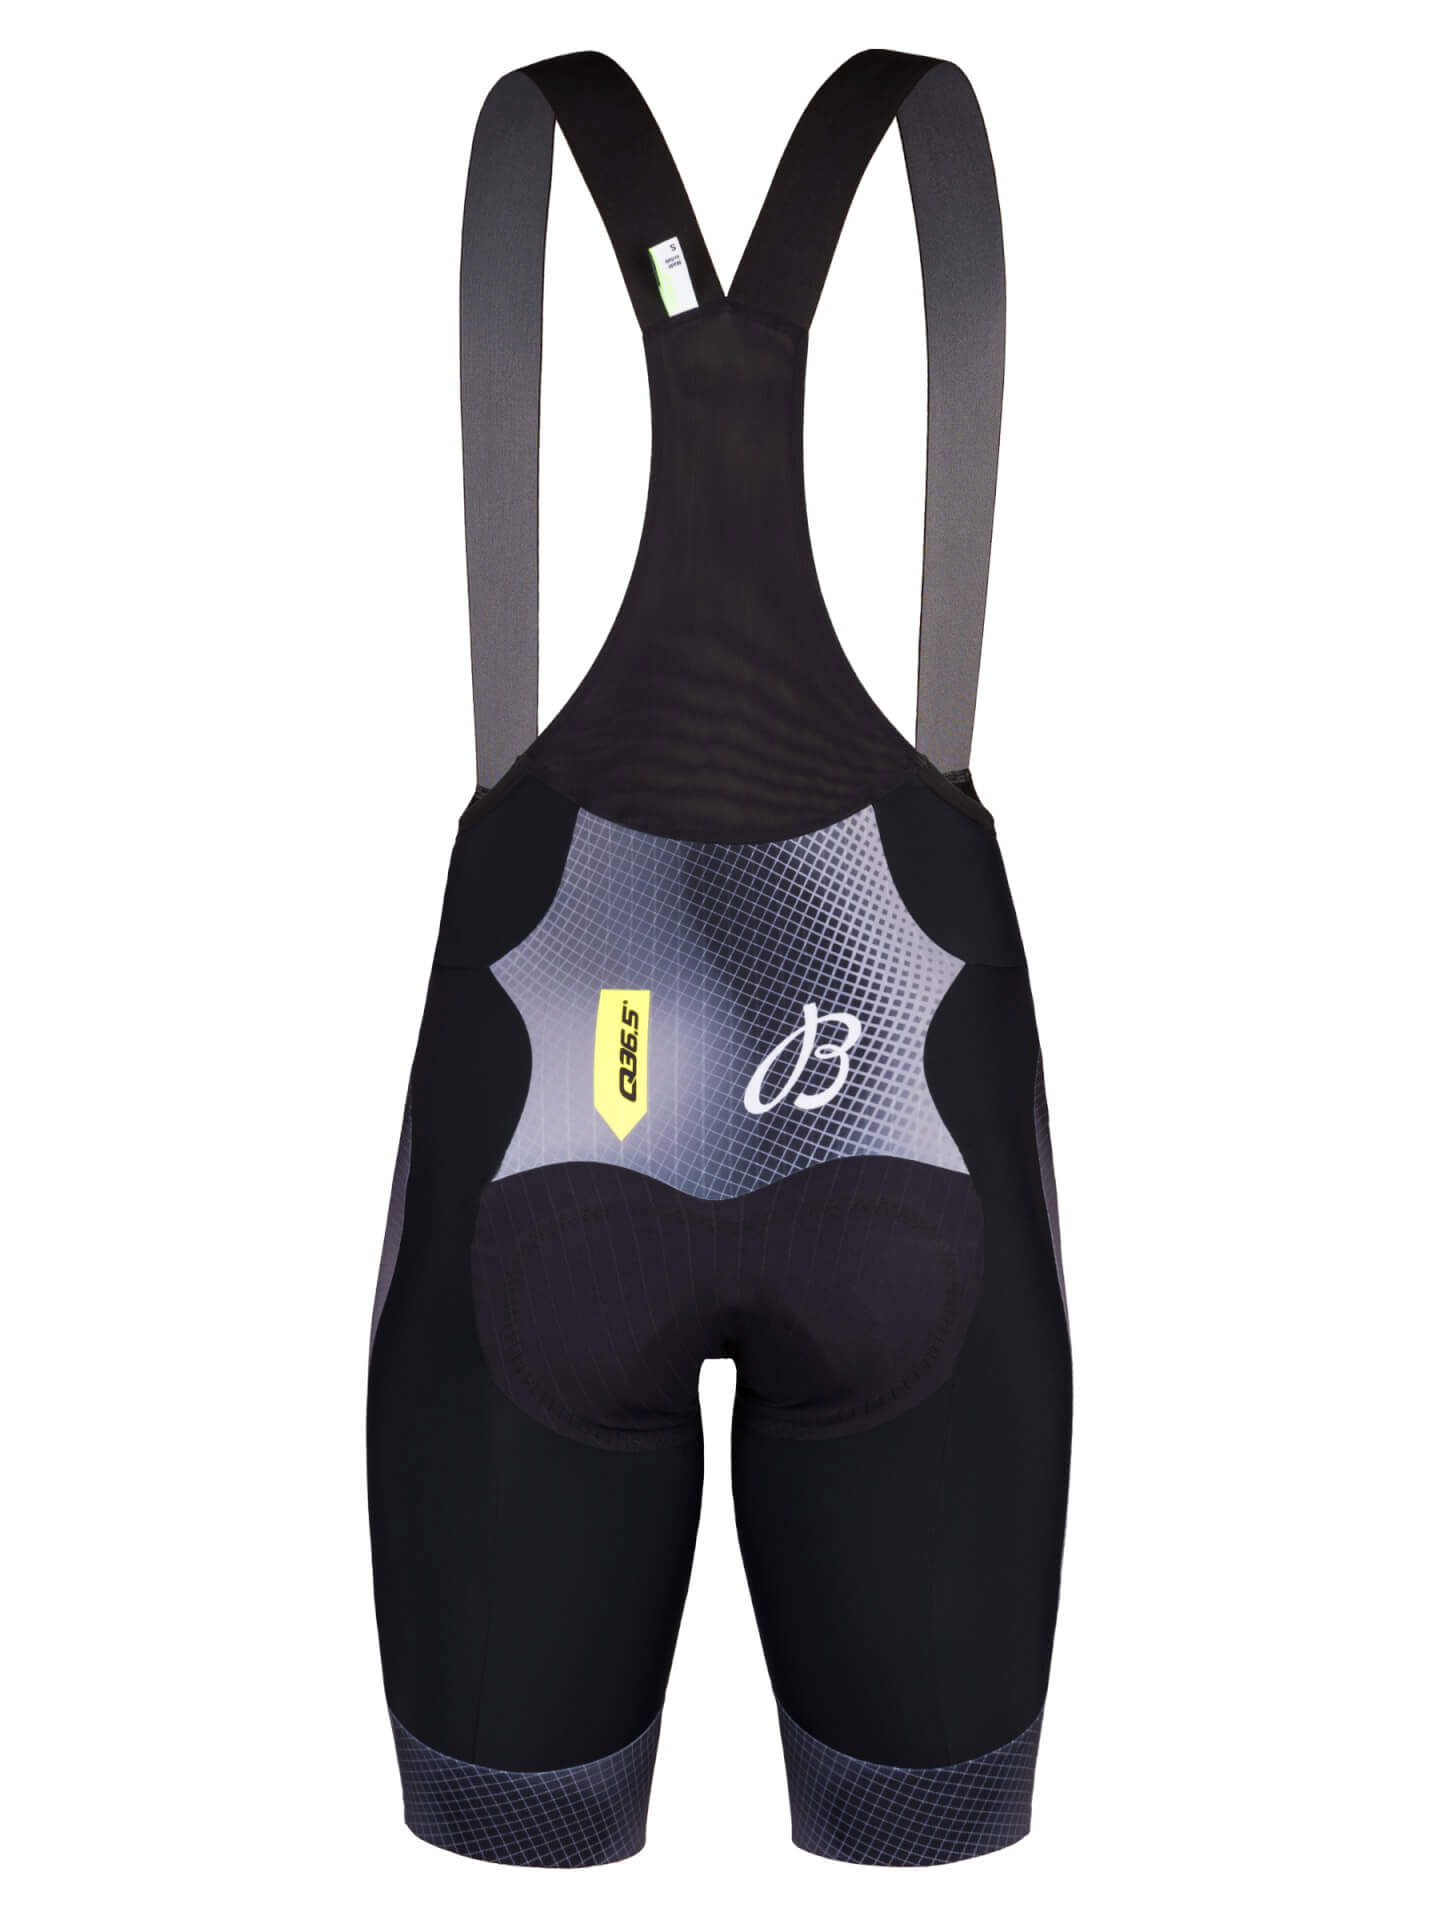 Training Cycling Bib Shorts - Men's Essential Collection - PEdALED